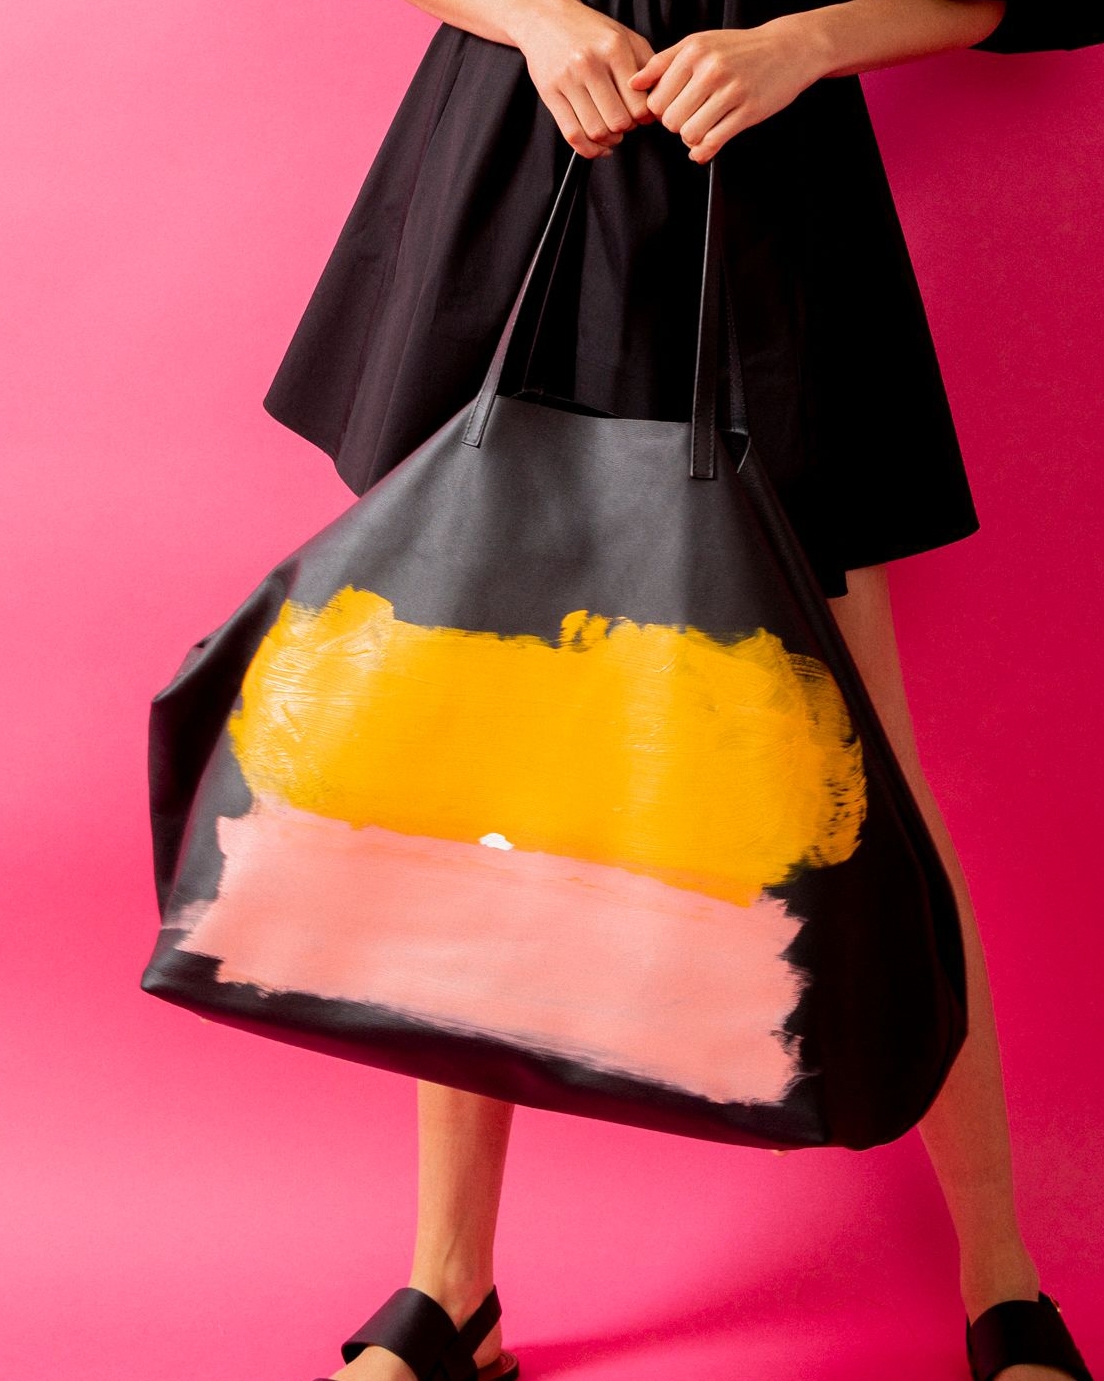 Oversized Pink Leather Tote Bag hand with Hand Painting by Grear Patterson,  2021, Free Arts NYC 22nd Annual Art Auction: Summer in September, 2021